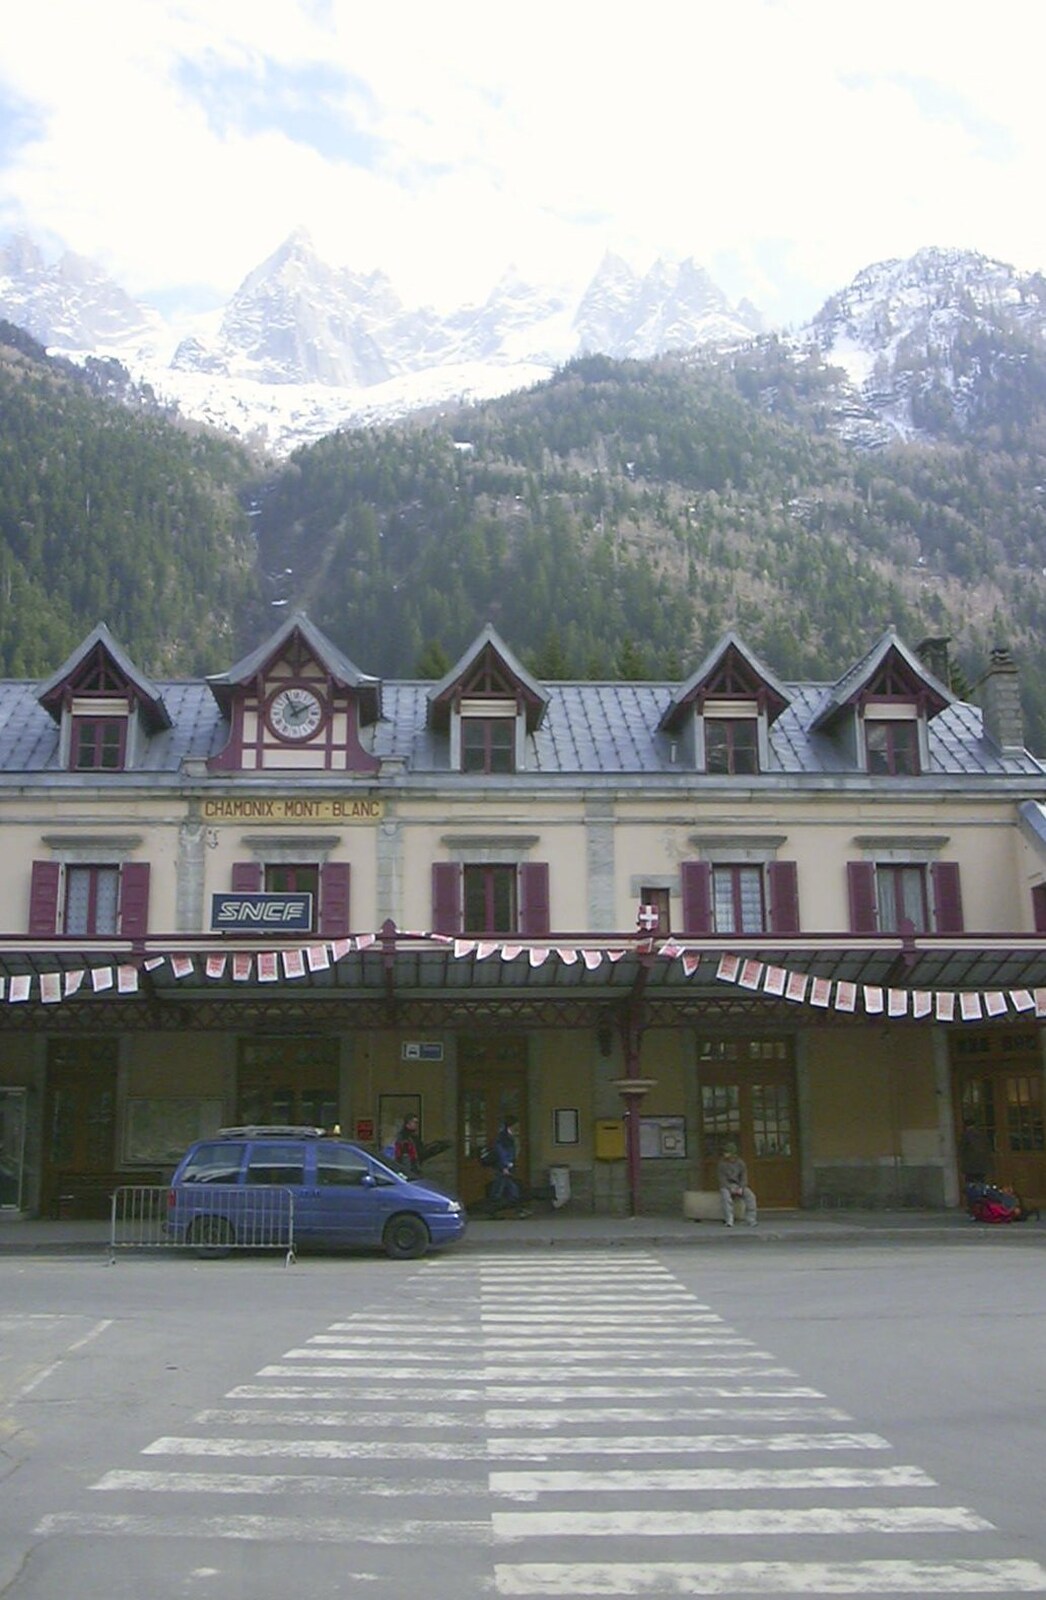 The SNCF railway station in Chamonix from 3G Lab Goes Skiing In Chamonix, France - 12th March 2002